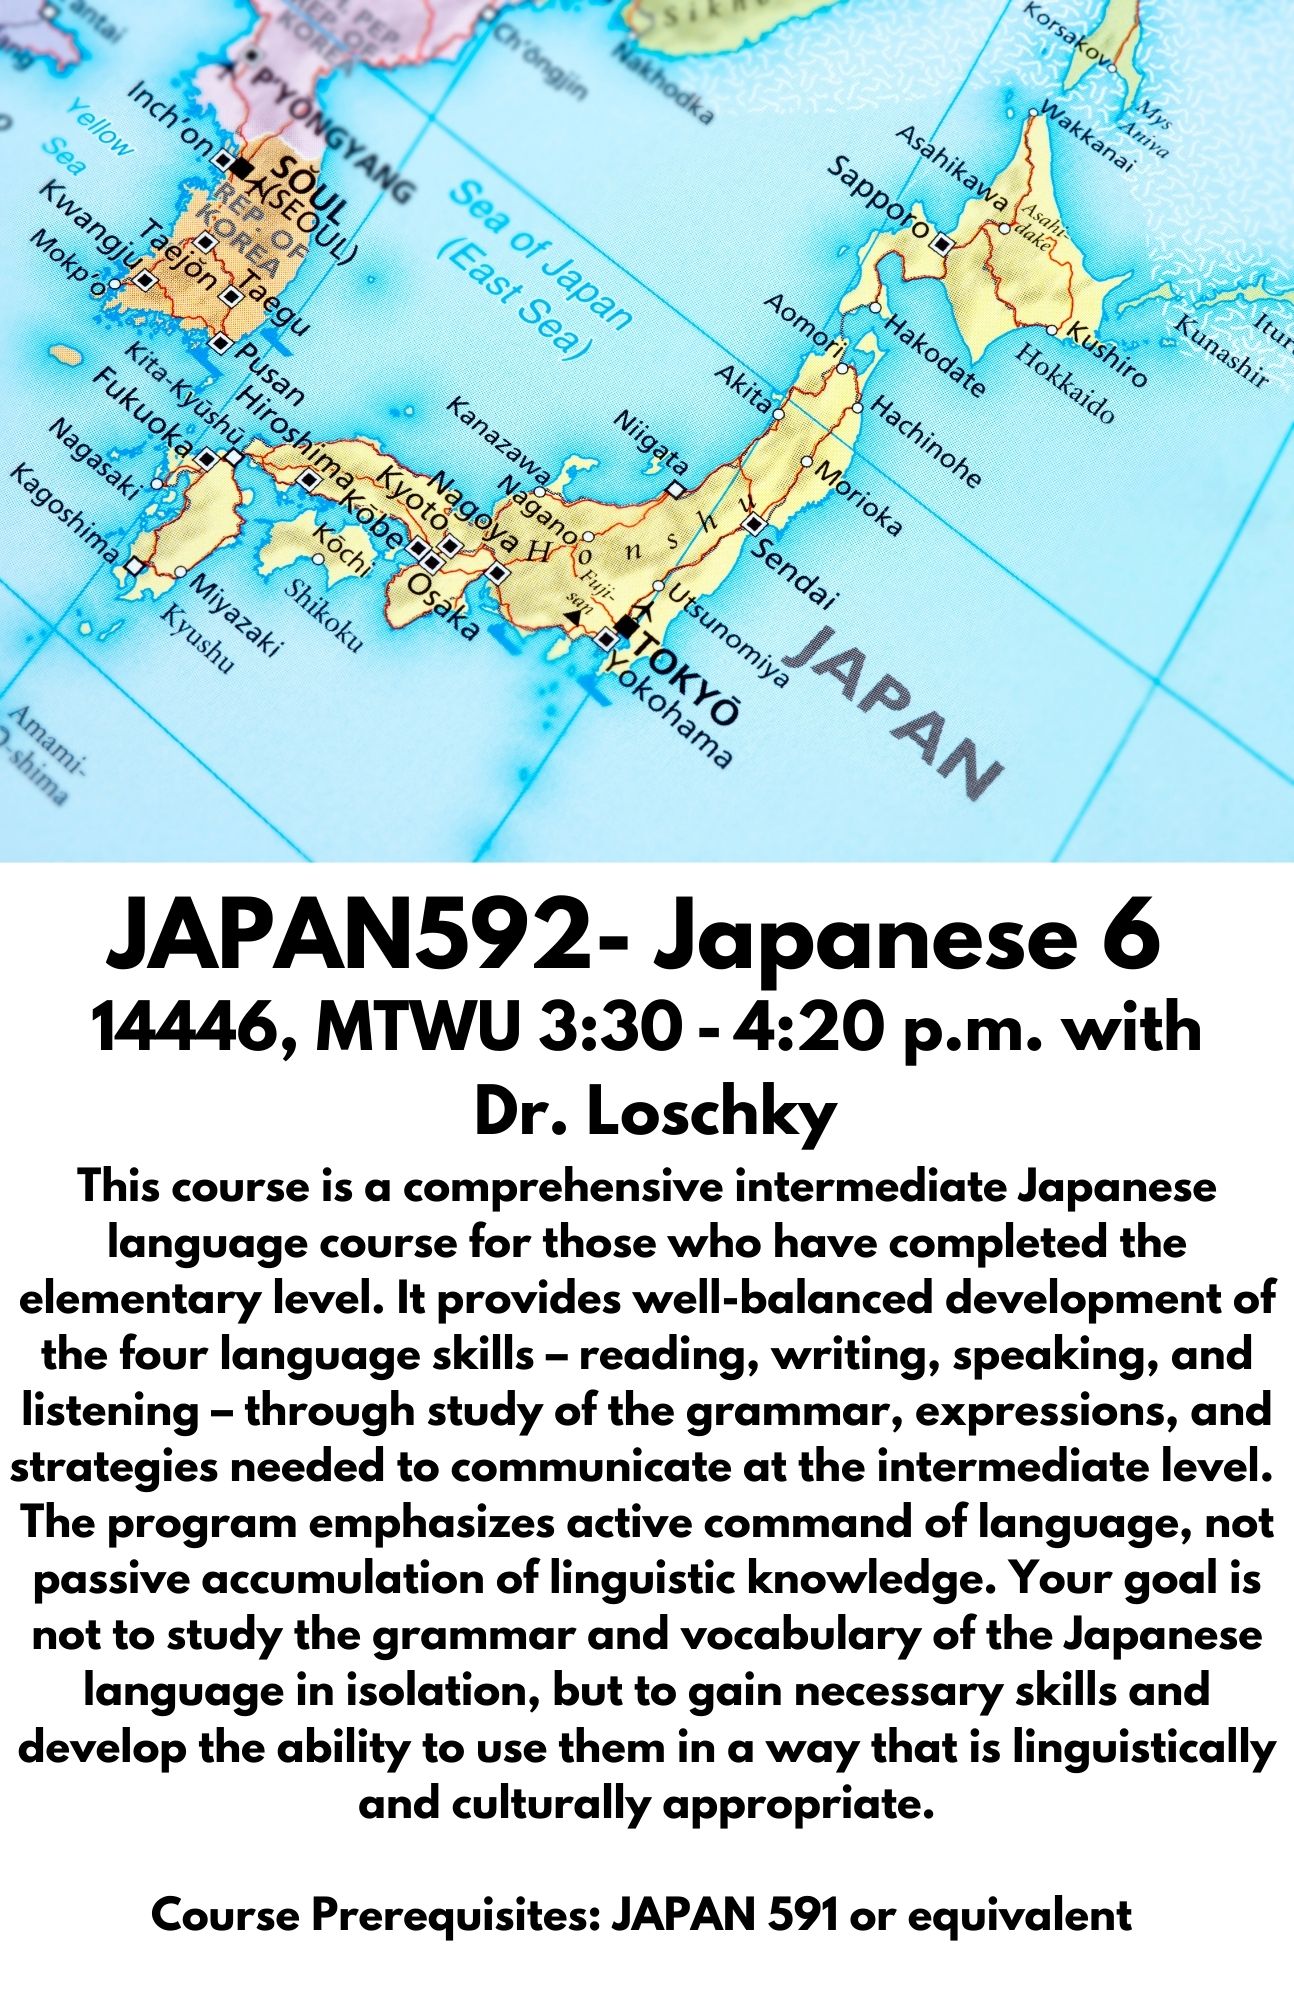 JAPAN592- Japanese 6. 14446, MTWU 3:30 - 4:20 p.m. with  Dr. Loschky. This course is a comprehensive intermediate Japanese language course for those who have completed the elementary level. It provides well-balanced development of the four language skills – reading, writing, speaking, and listening – through study of the grammar, expressions, and strategies needed to communicate at the intermediate level.  The program emphasizes active command of language, not passive accumulation of linguistic knowledge. Your goal is not to study the grammar and vocabulary of the Japanese language in isolation, but to gain necessary skills and develop the ability to use them in a way that is linguistically and culturally appropriate.  Course Prerequisites: JAPAN 591 or equivalent 